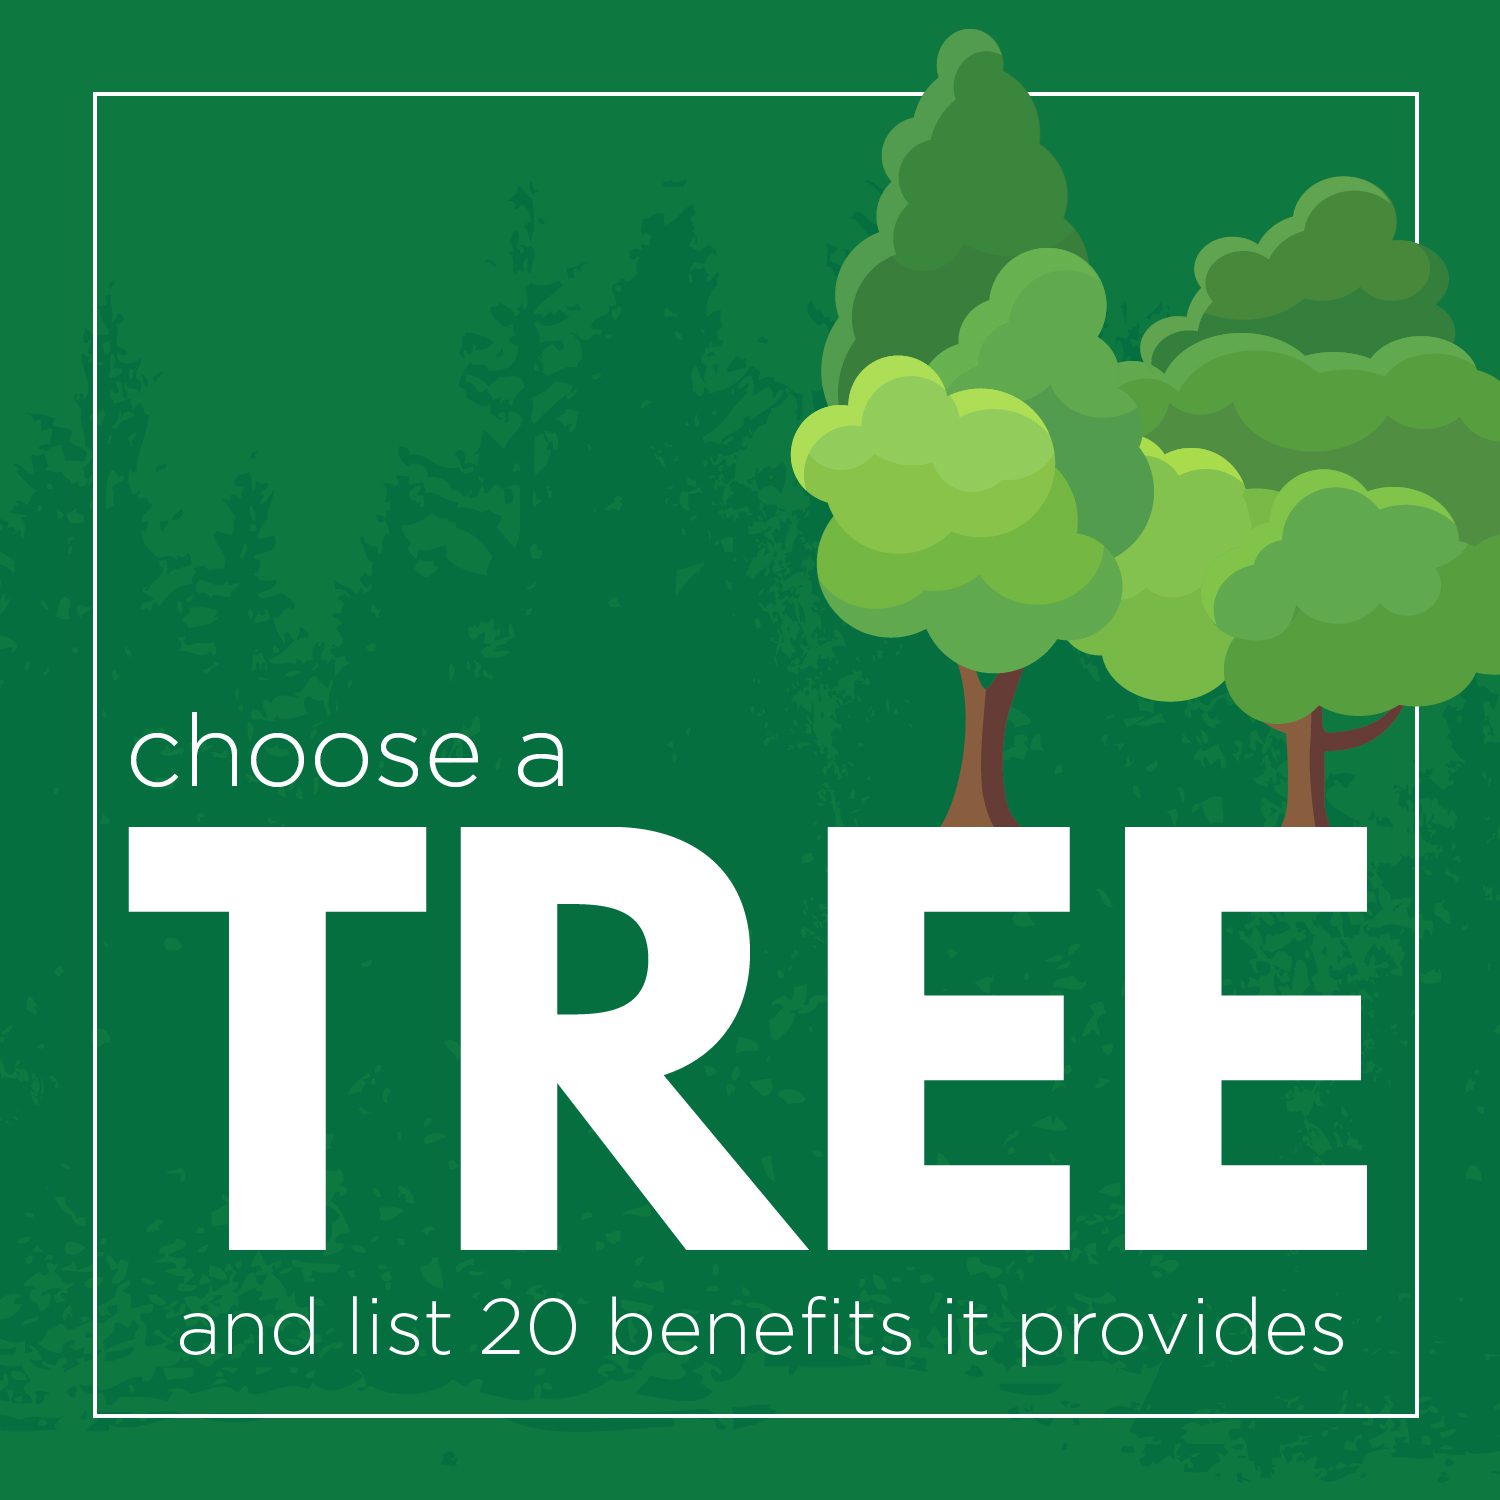 Choose a tree and list 20 benefits it provides